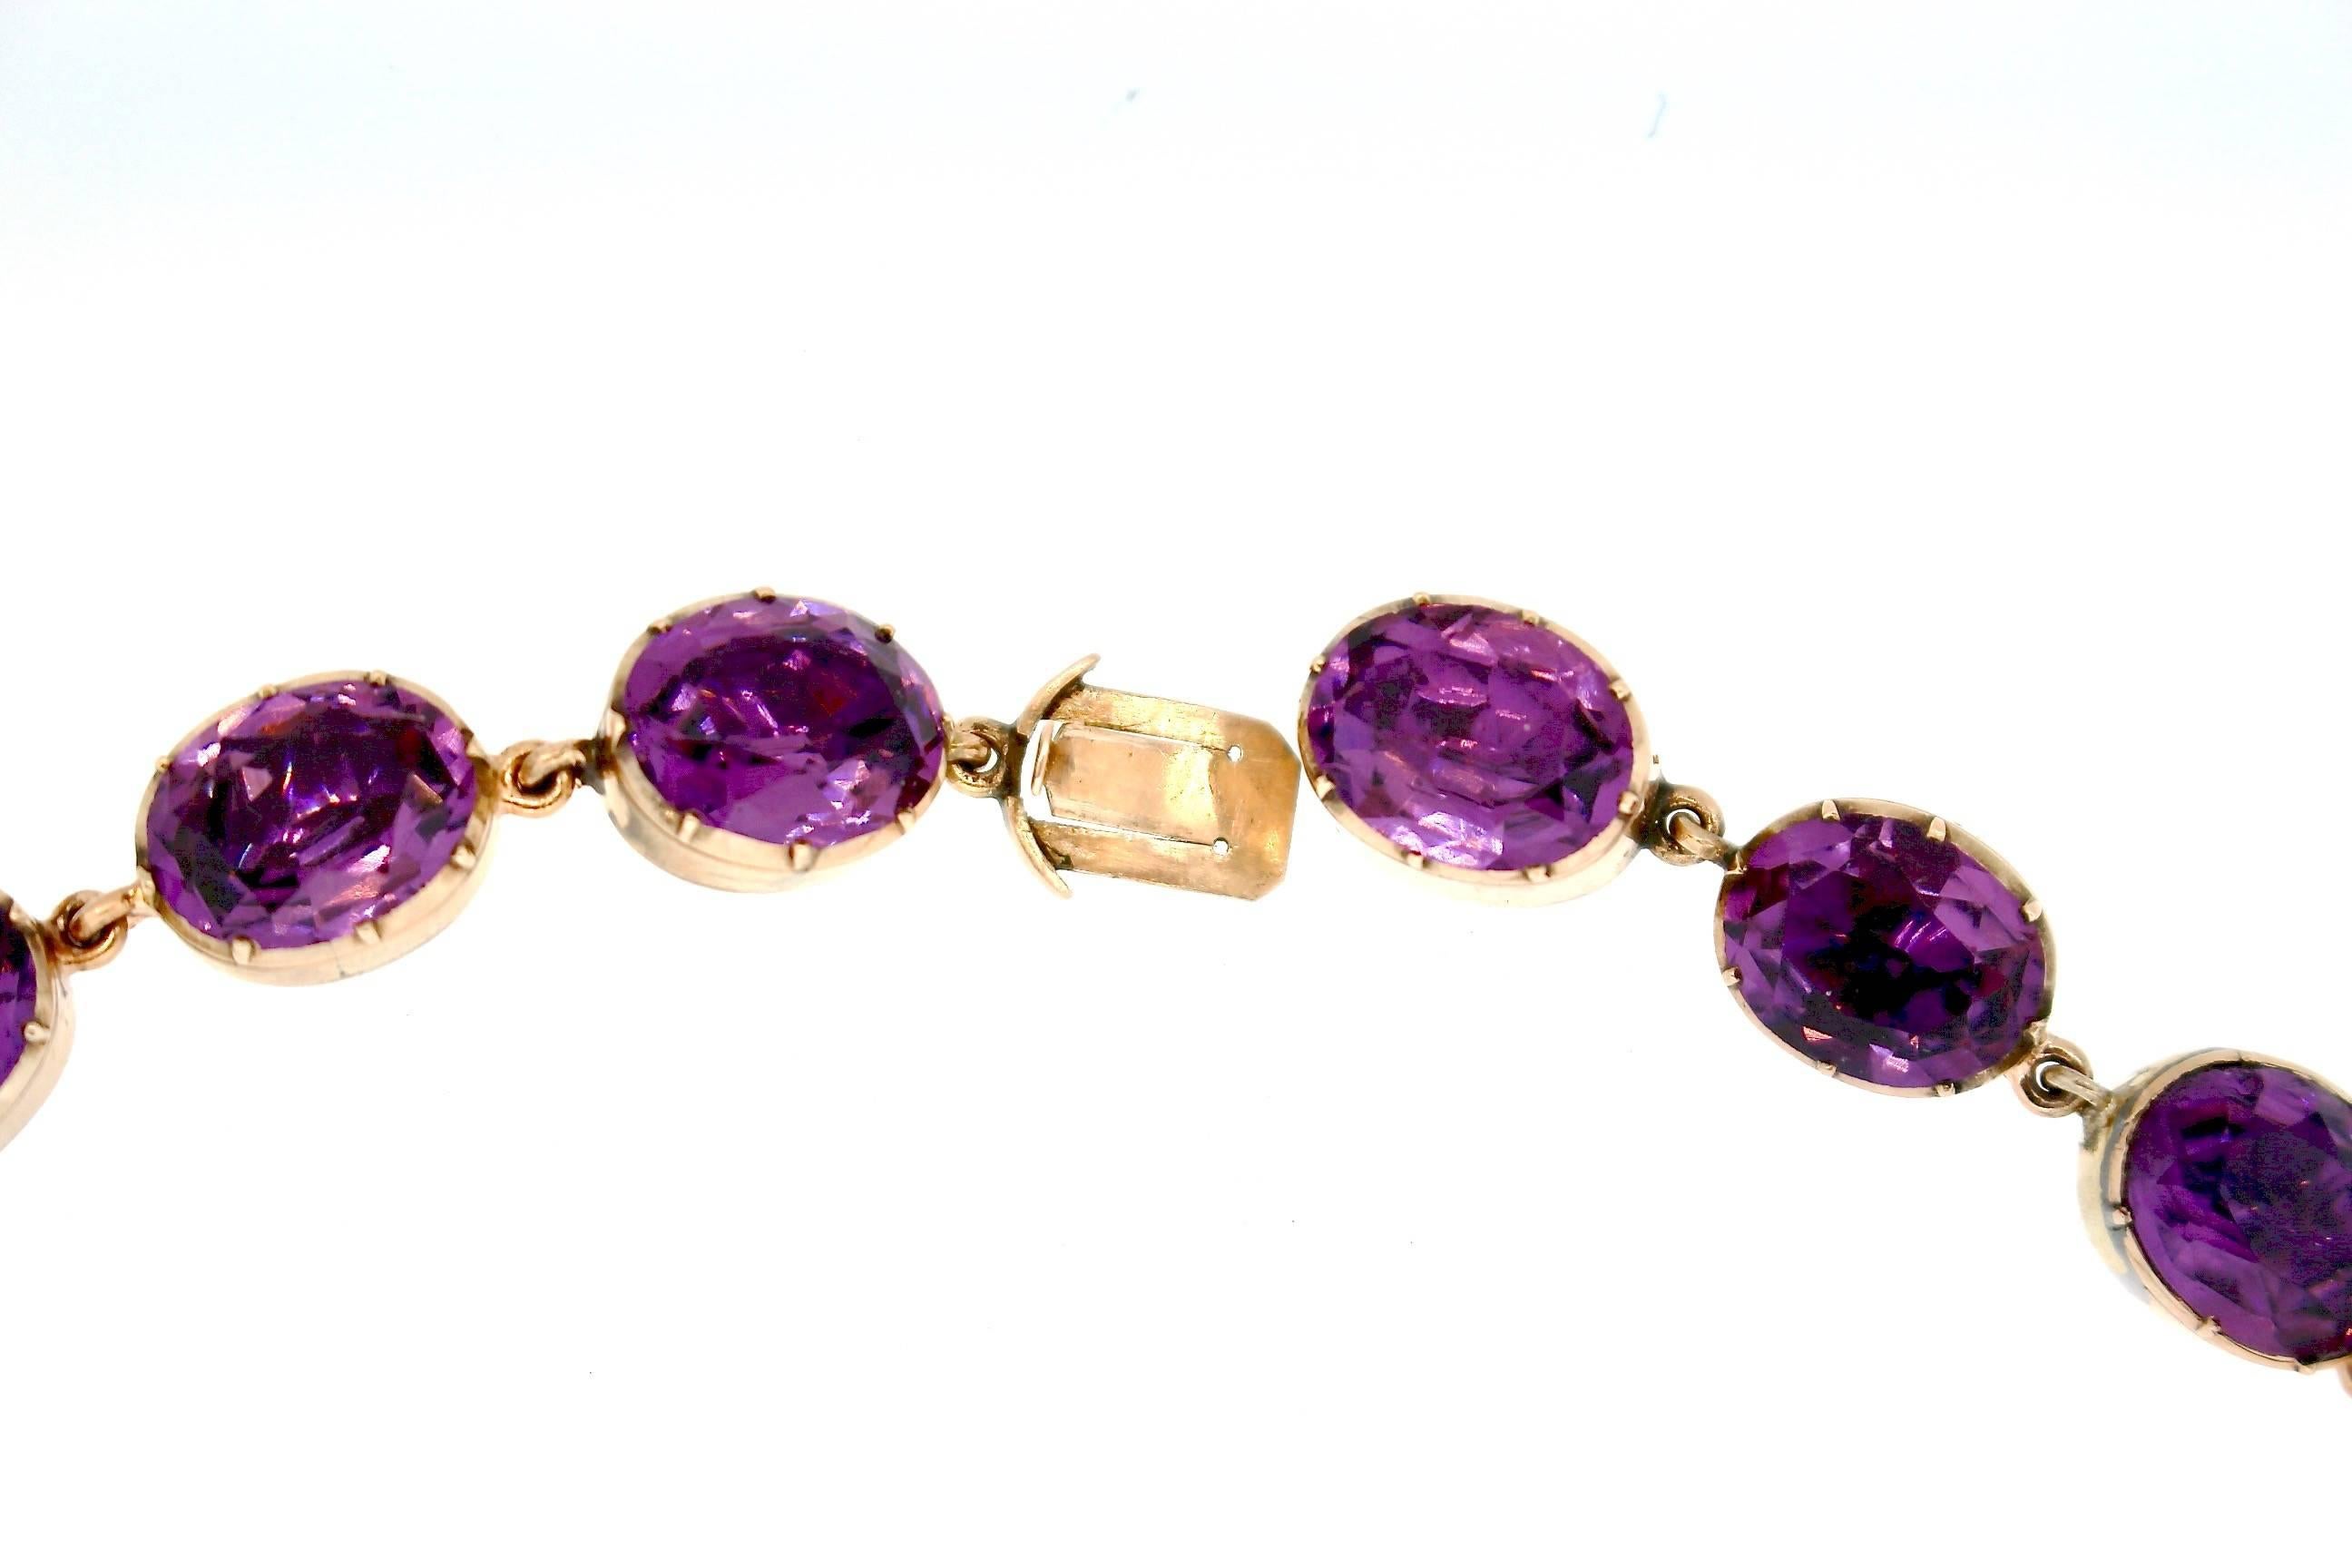 A bright and lively amethyst gold riviere necklace from about 1830.  This necklace is made up of brilliant colored amethysts, likely Russian in origin.  These necklaces from the Georgian era were popular and sought after.  Often they were part of